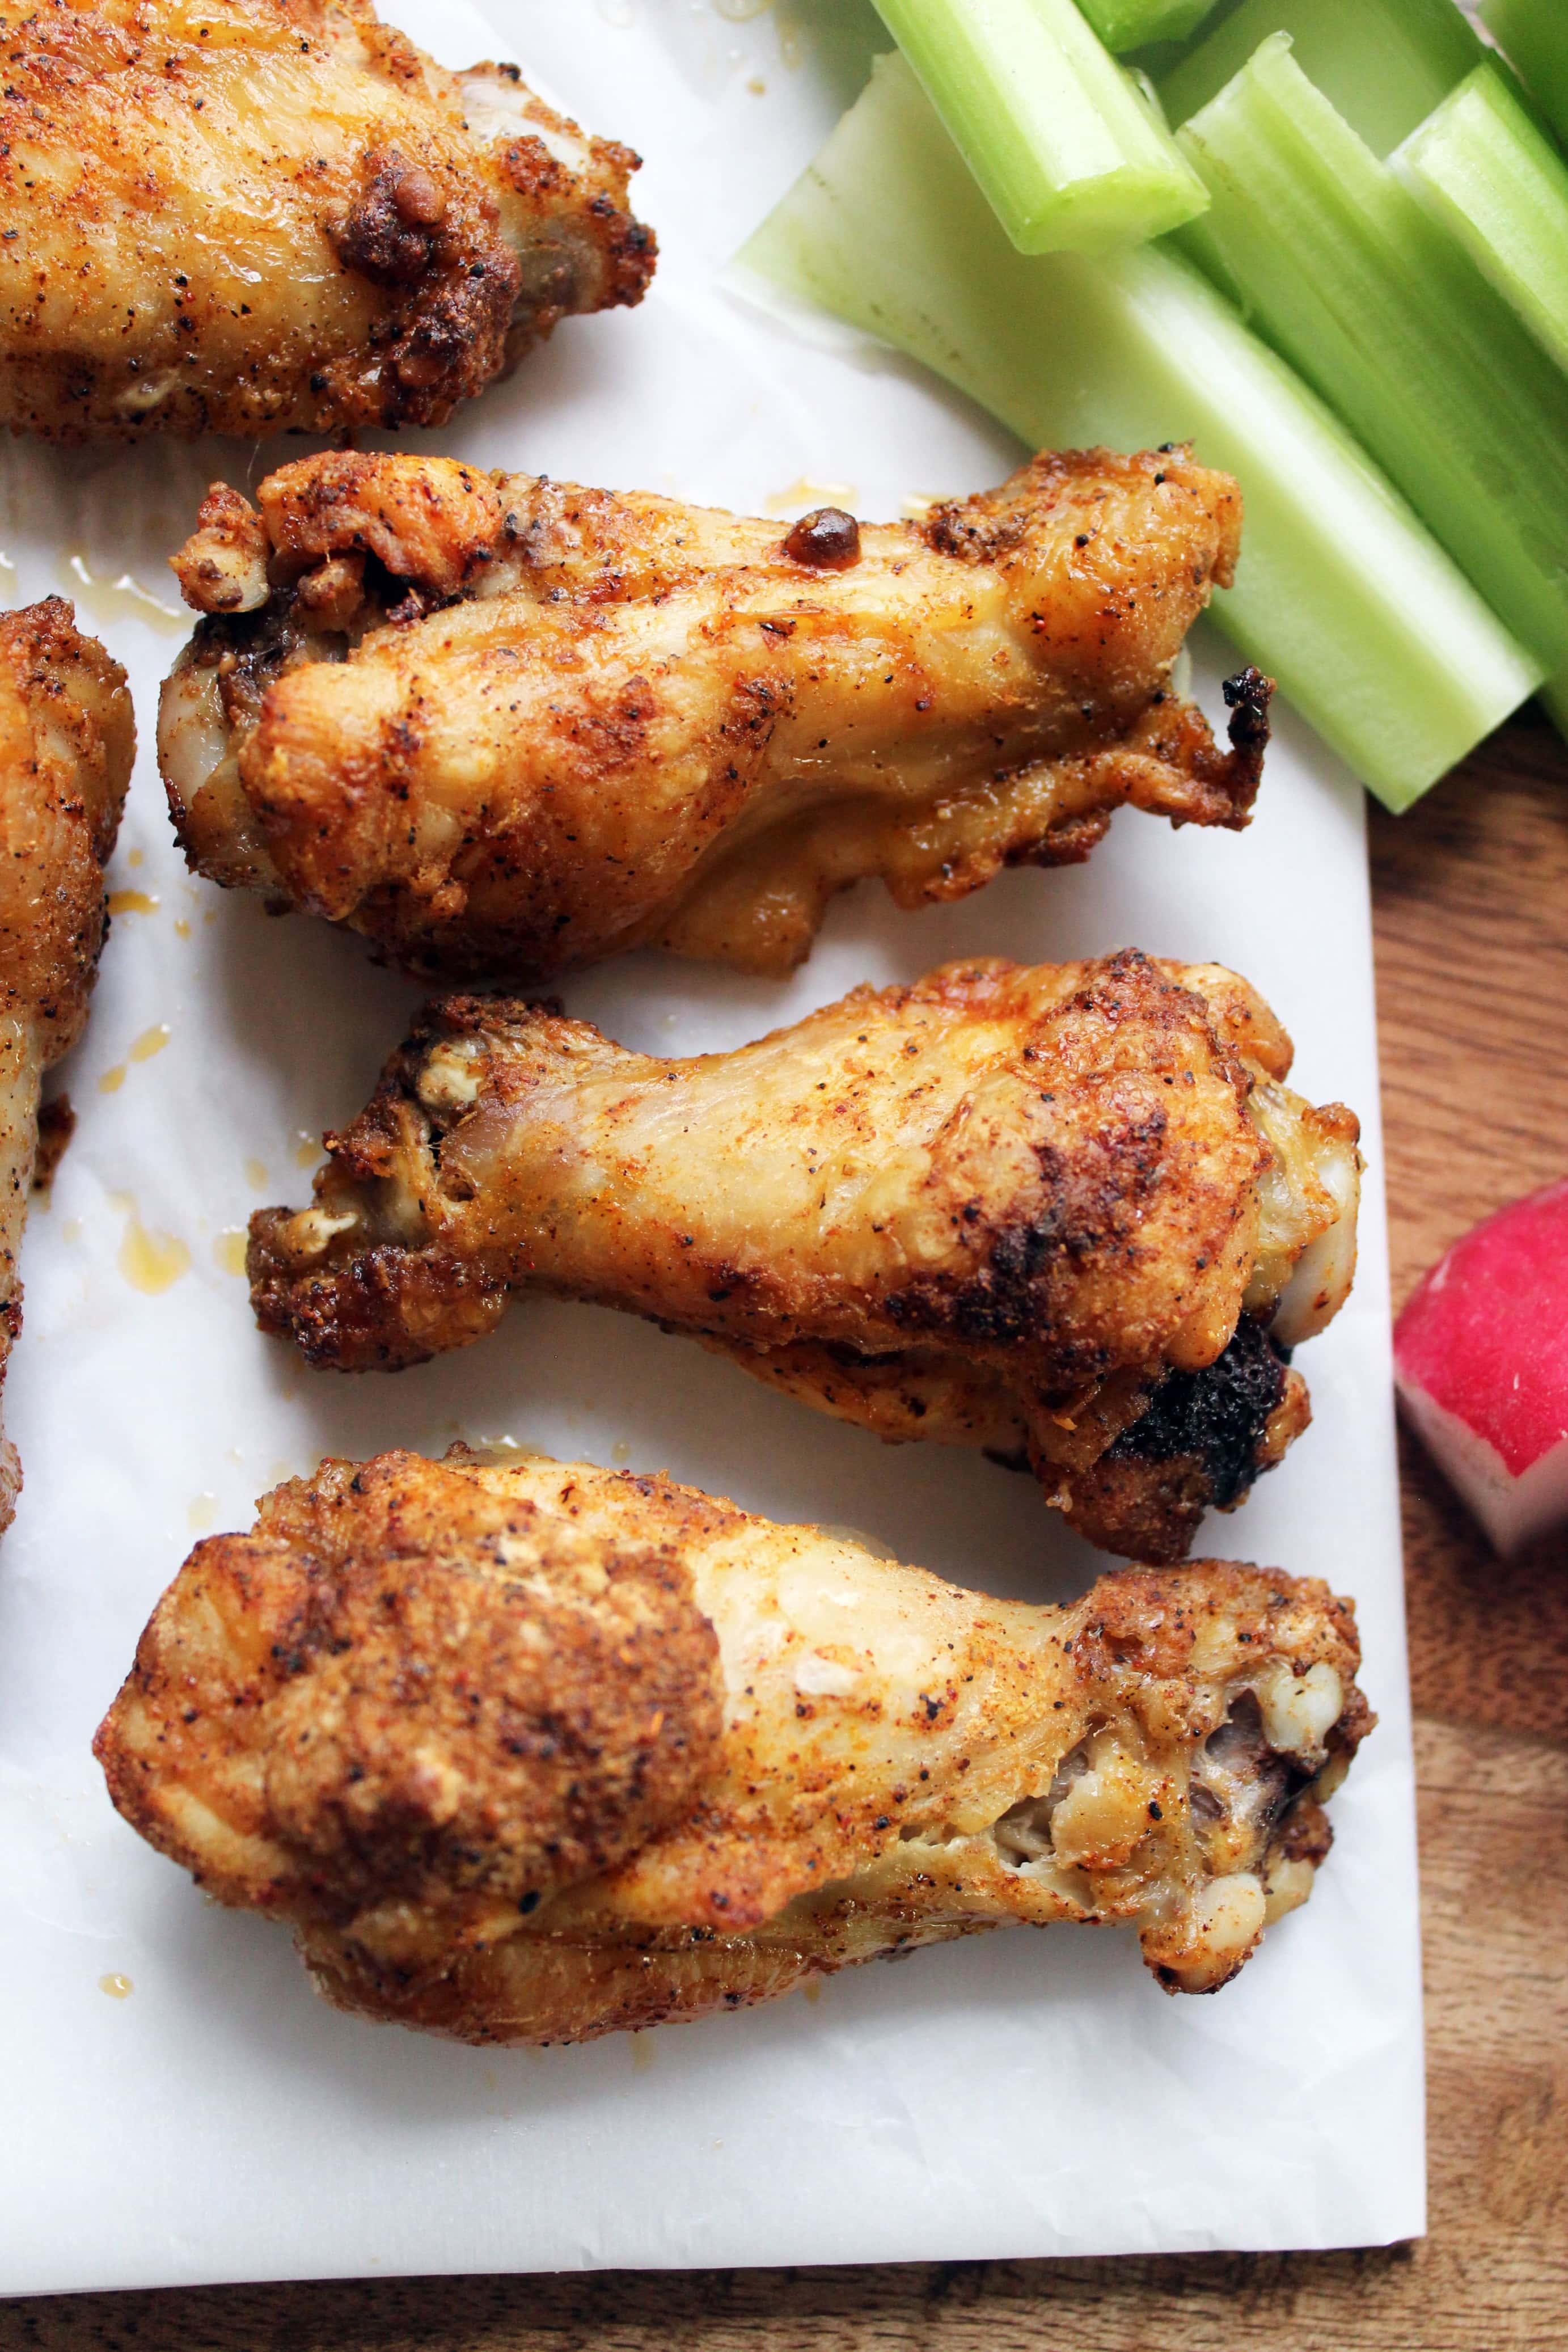 three baked chicken wings in a row on white parchment paper with celery sticks on the side.